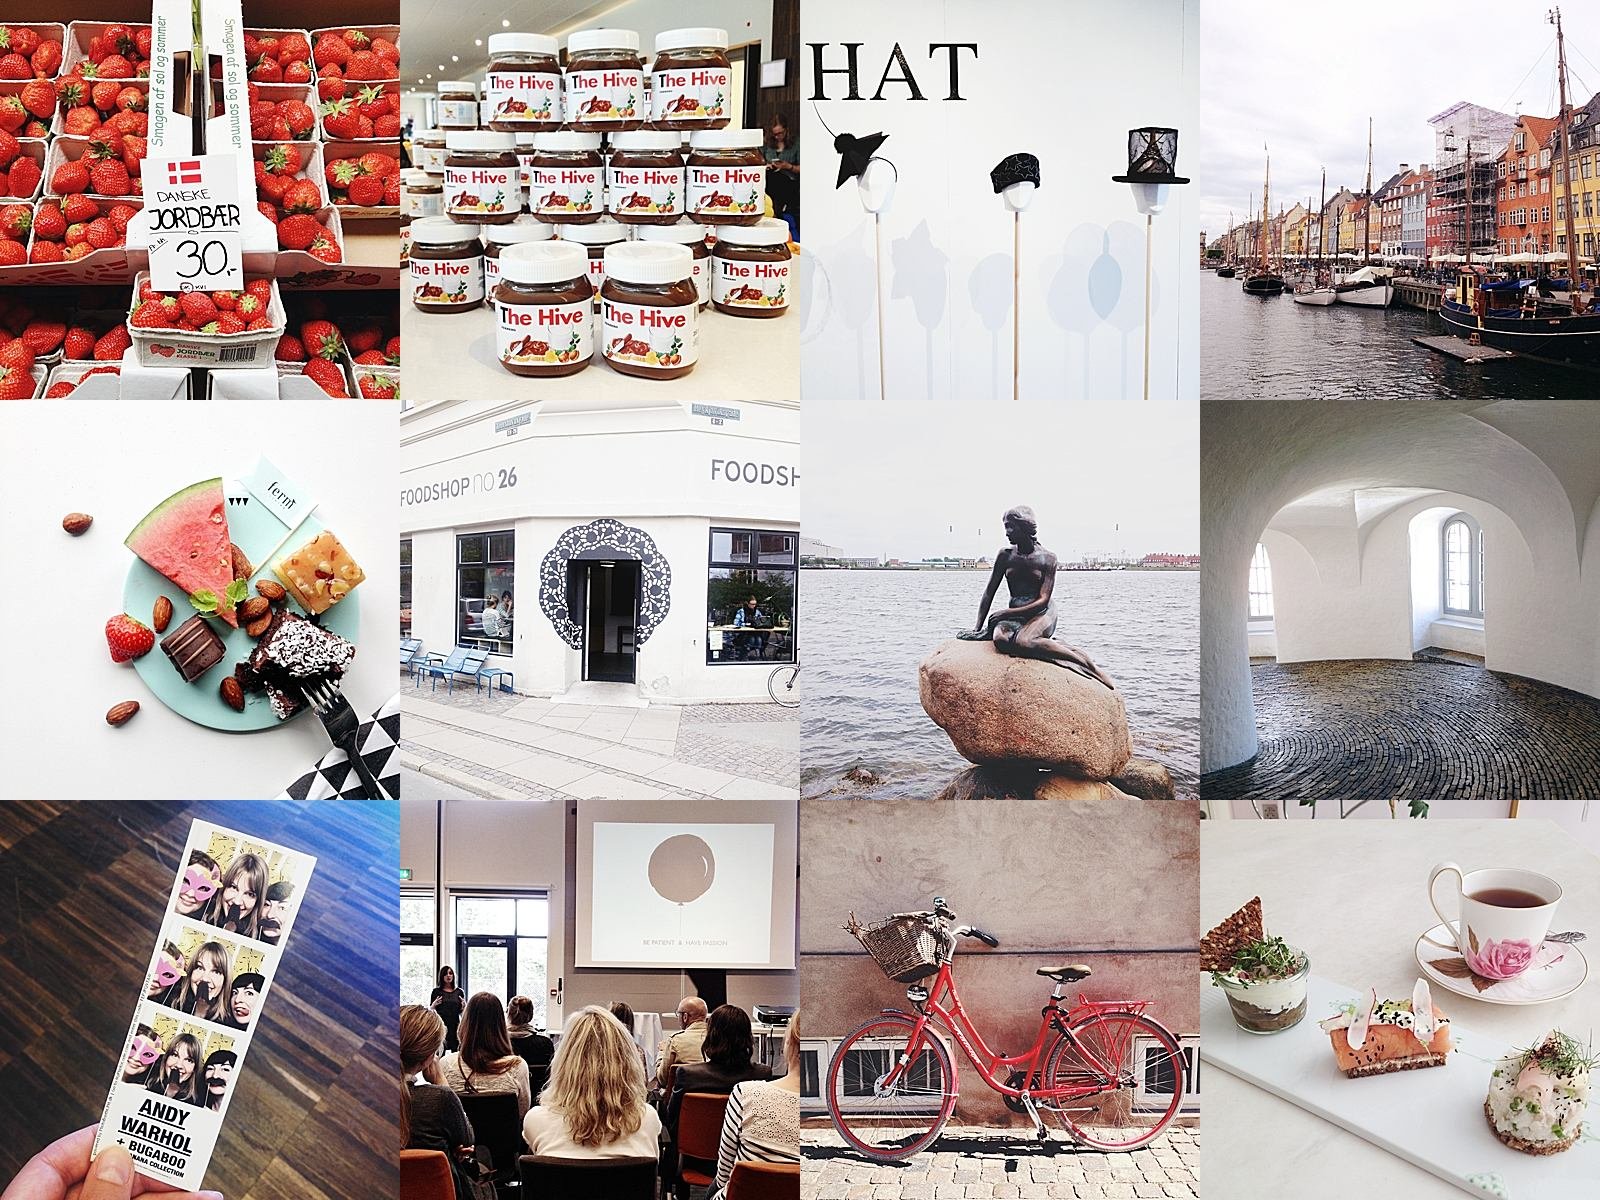 Copenhagen and The Hive Blog Conference on Instagram